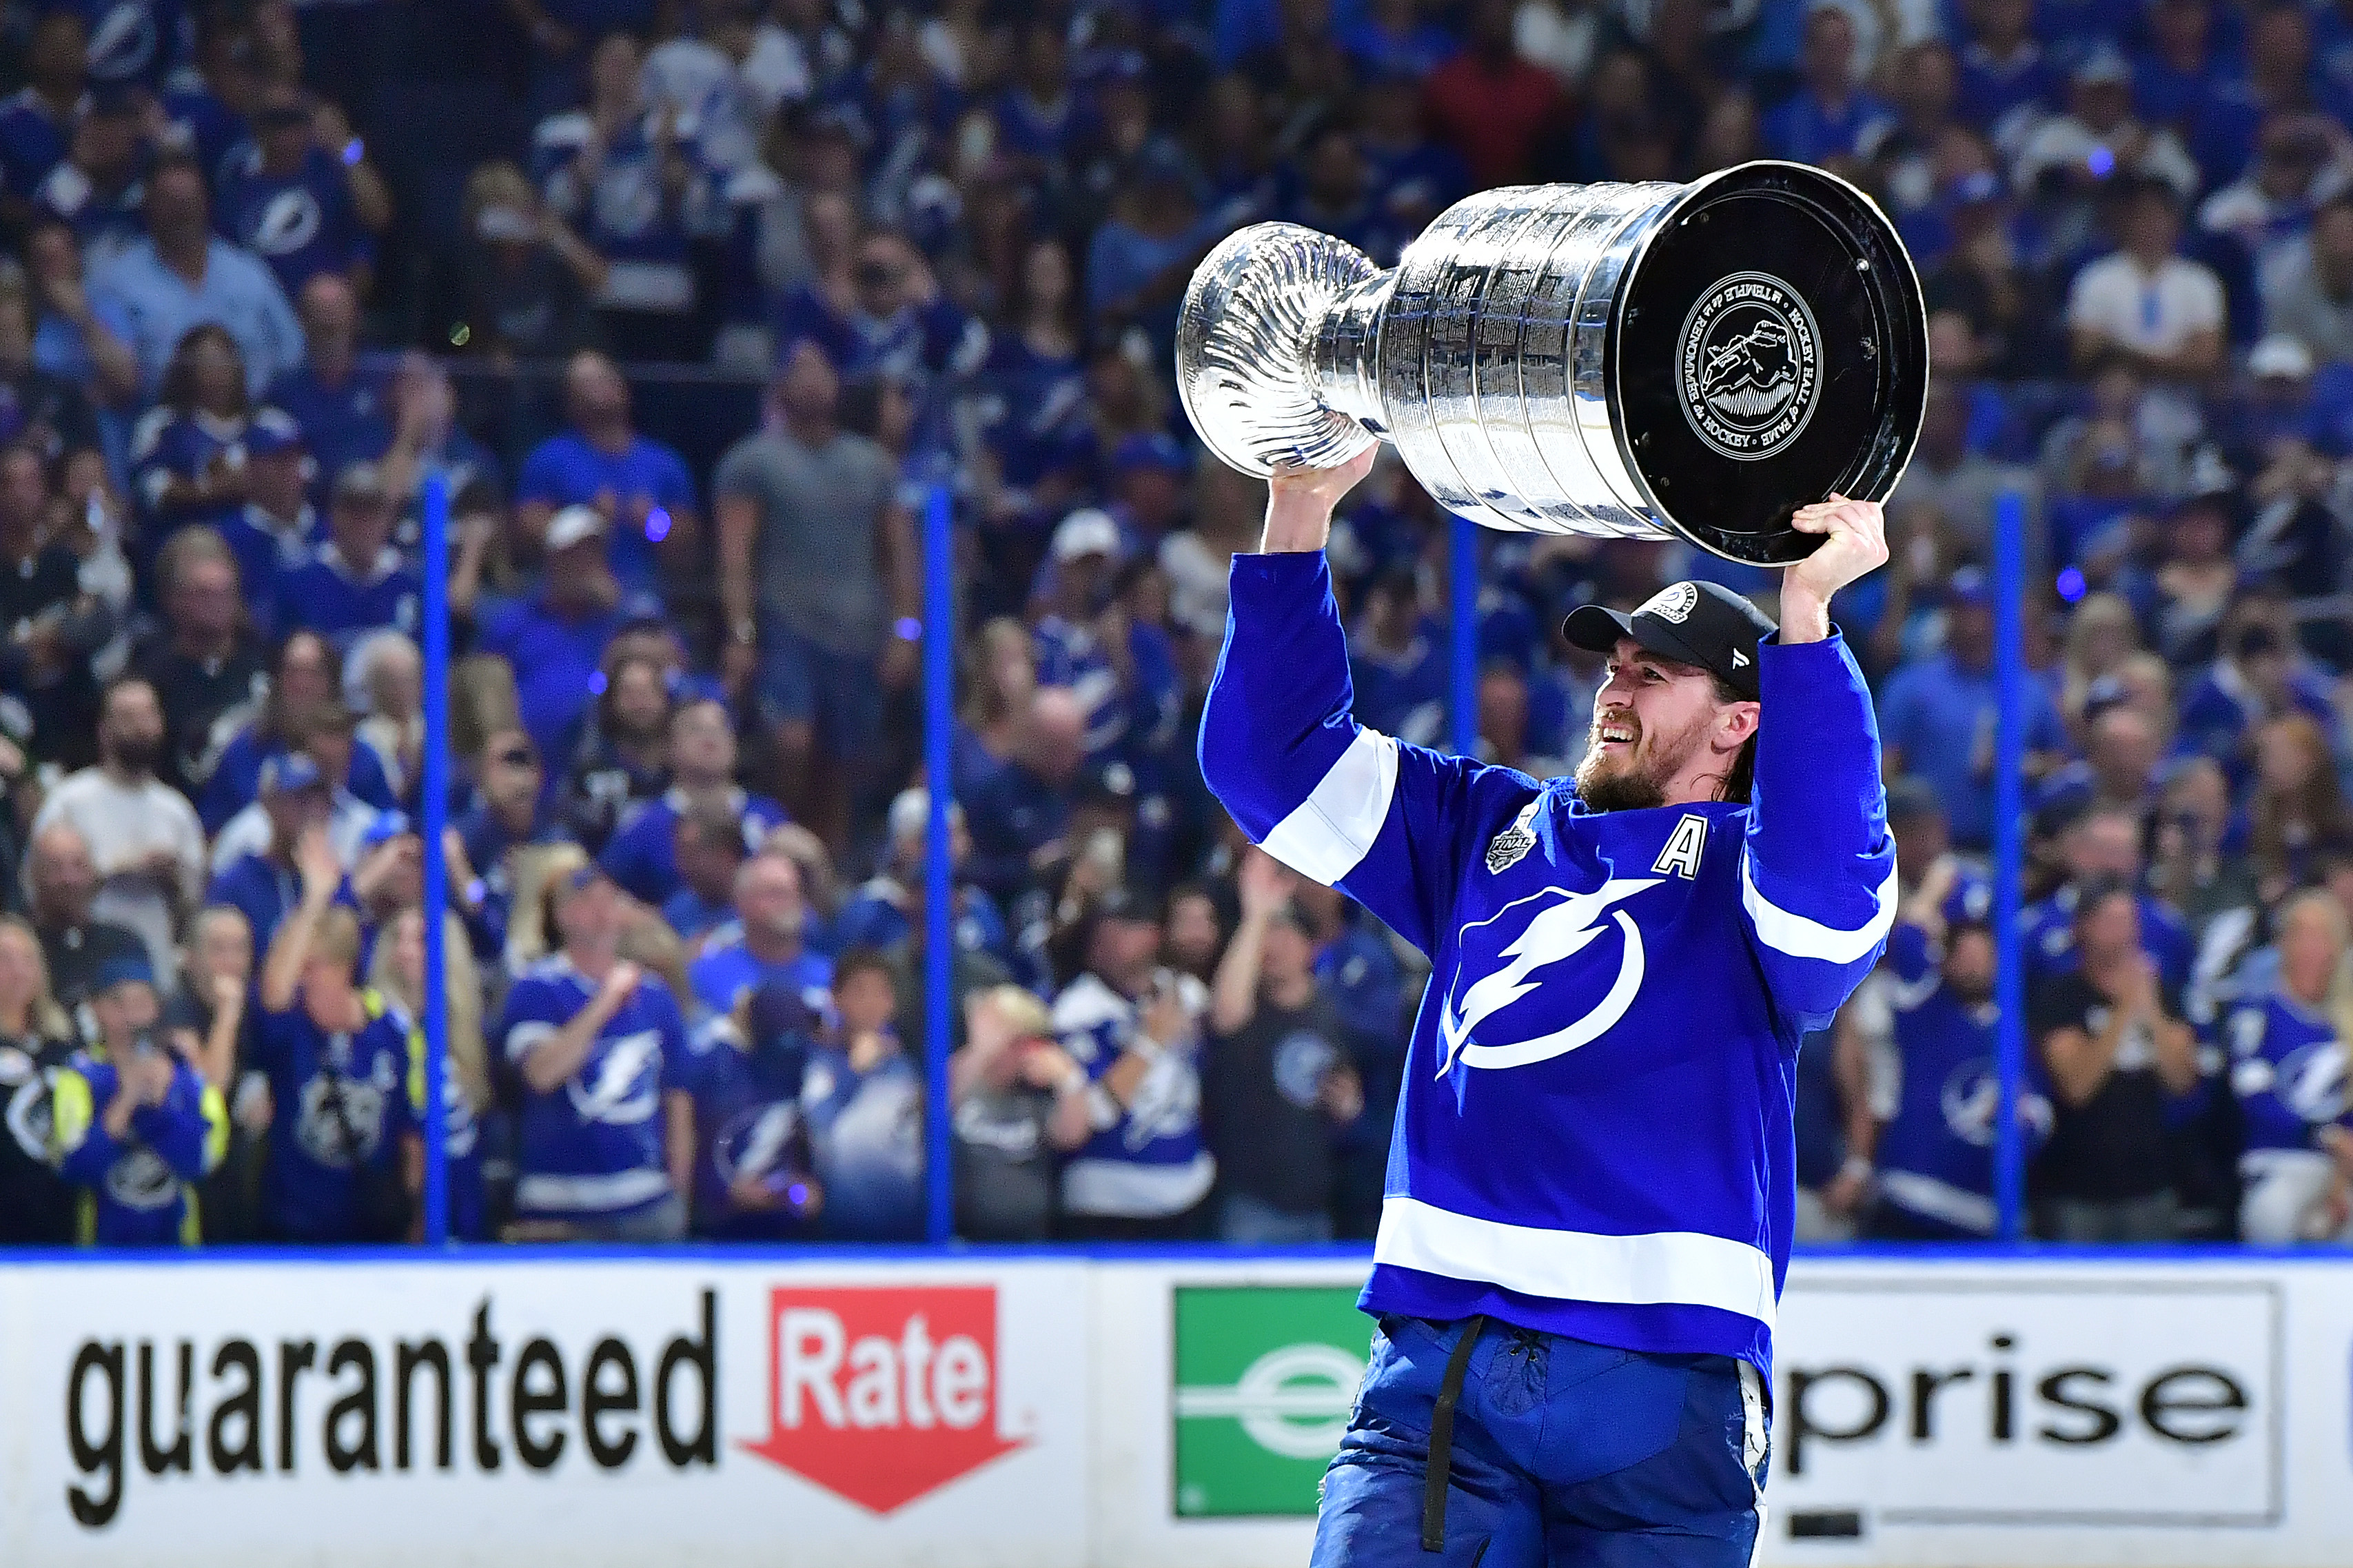 Tampa Bay Lightning Repeat as Stanley Cup Champions - The New York